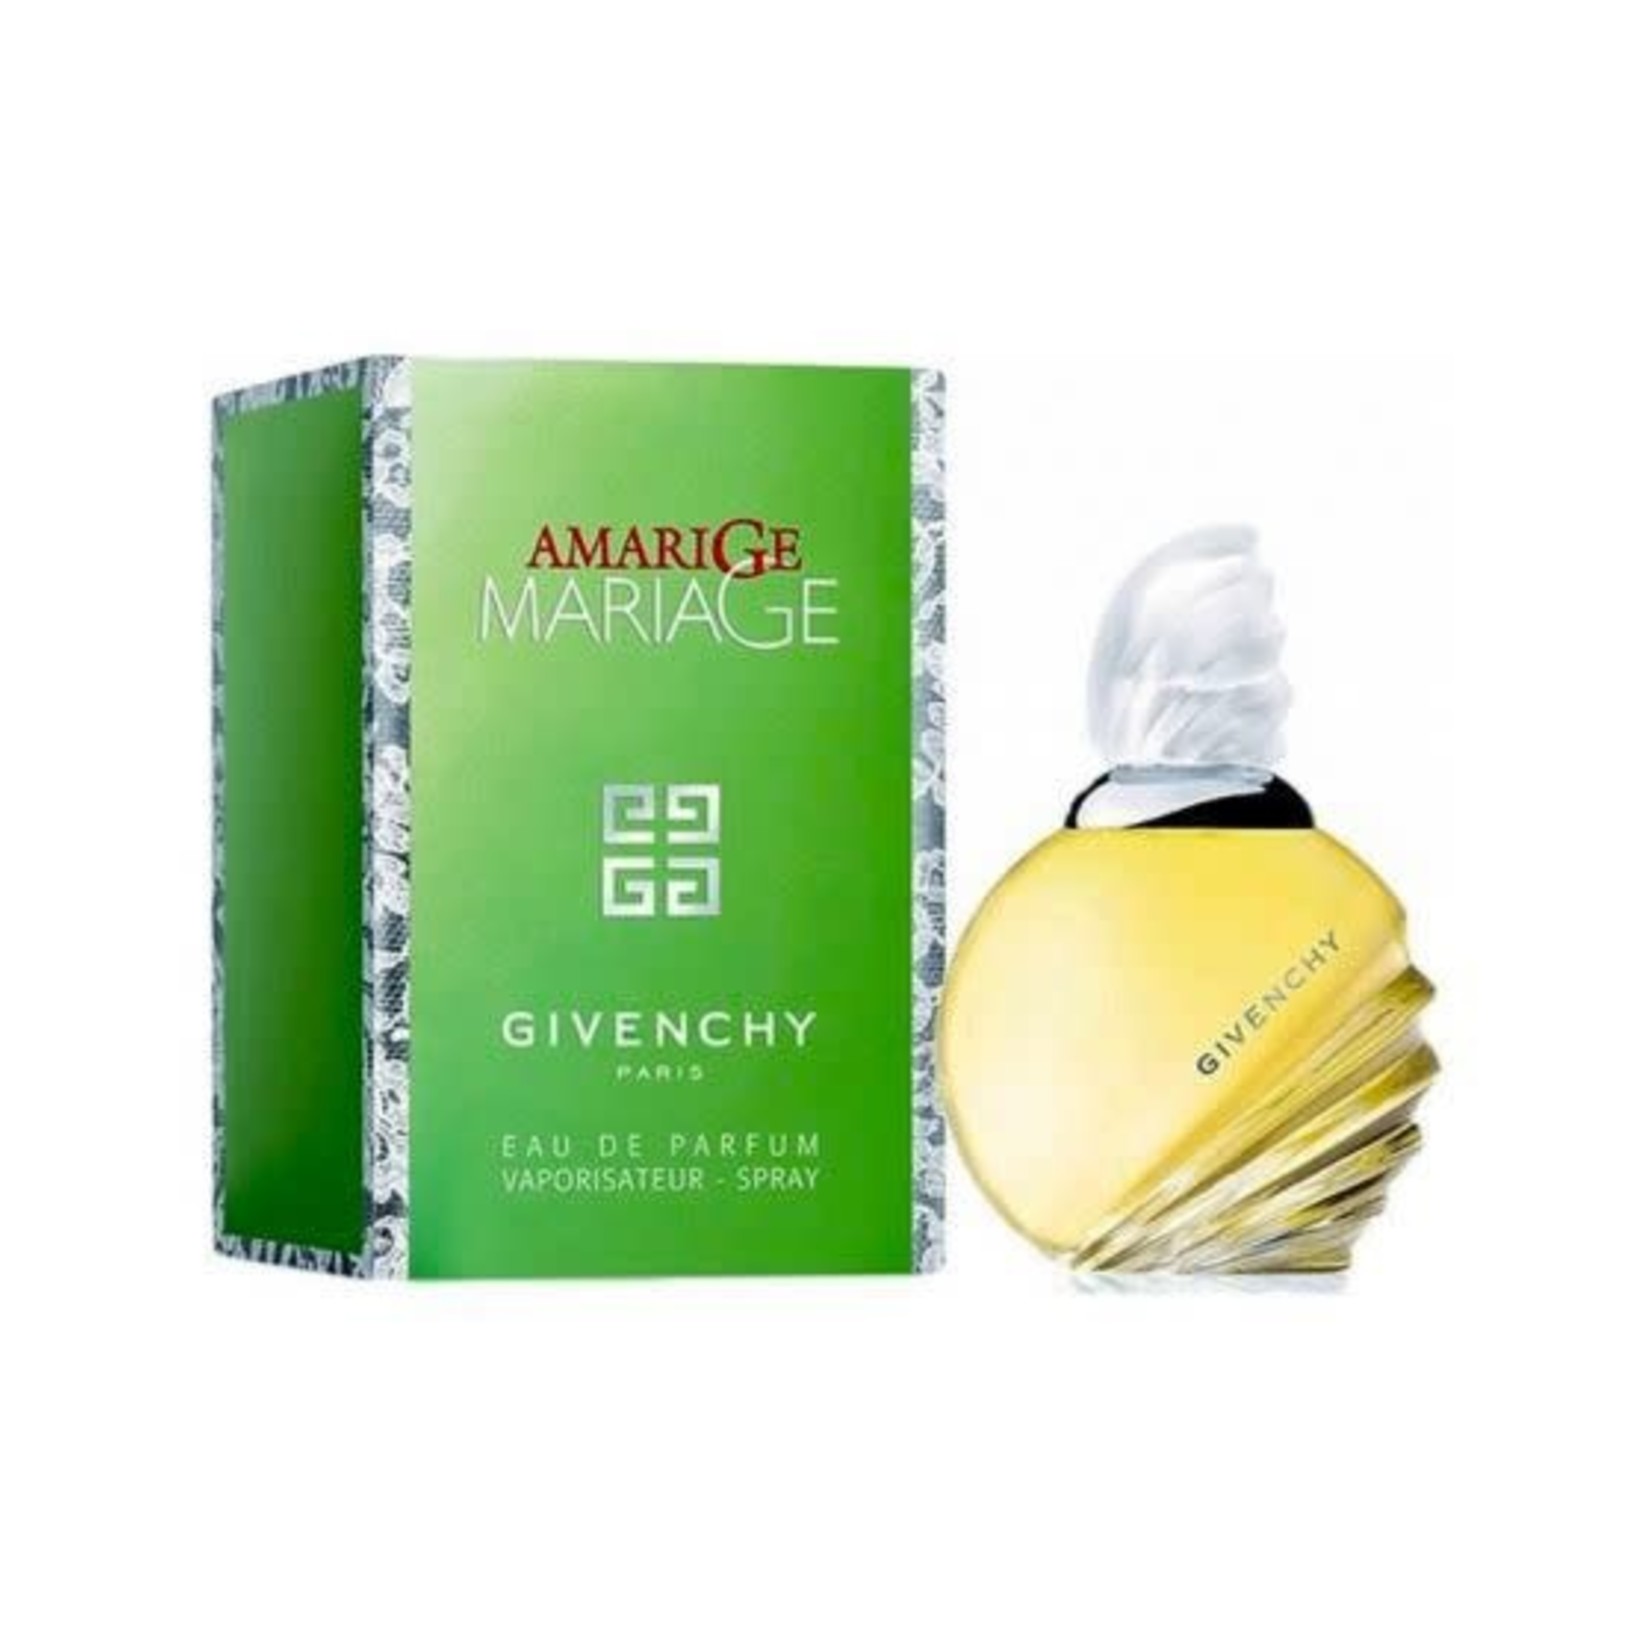 Givenchy Amarige Mariage by Givenchy